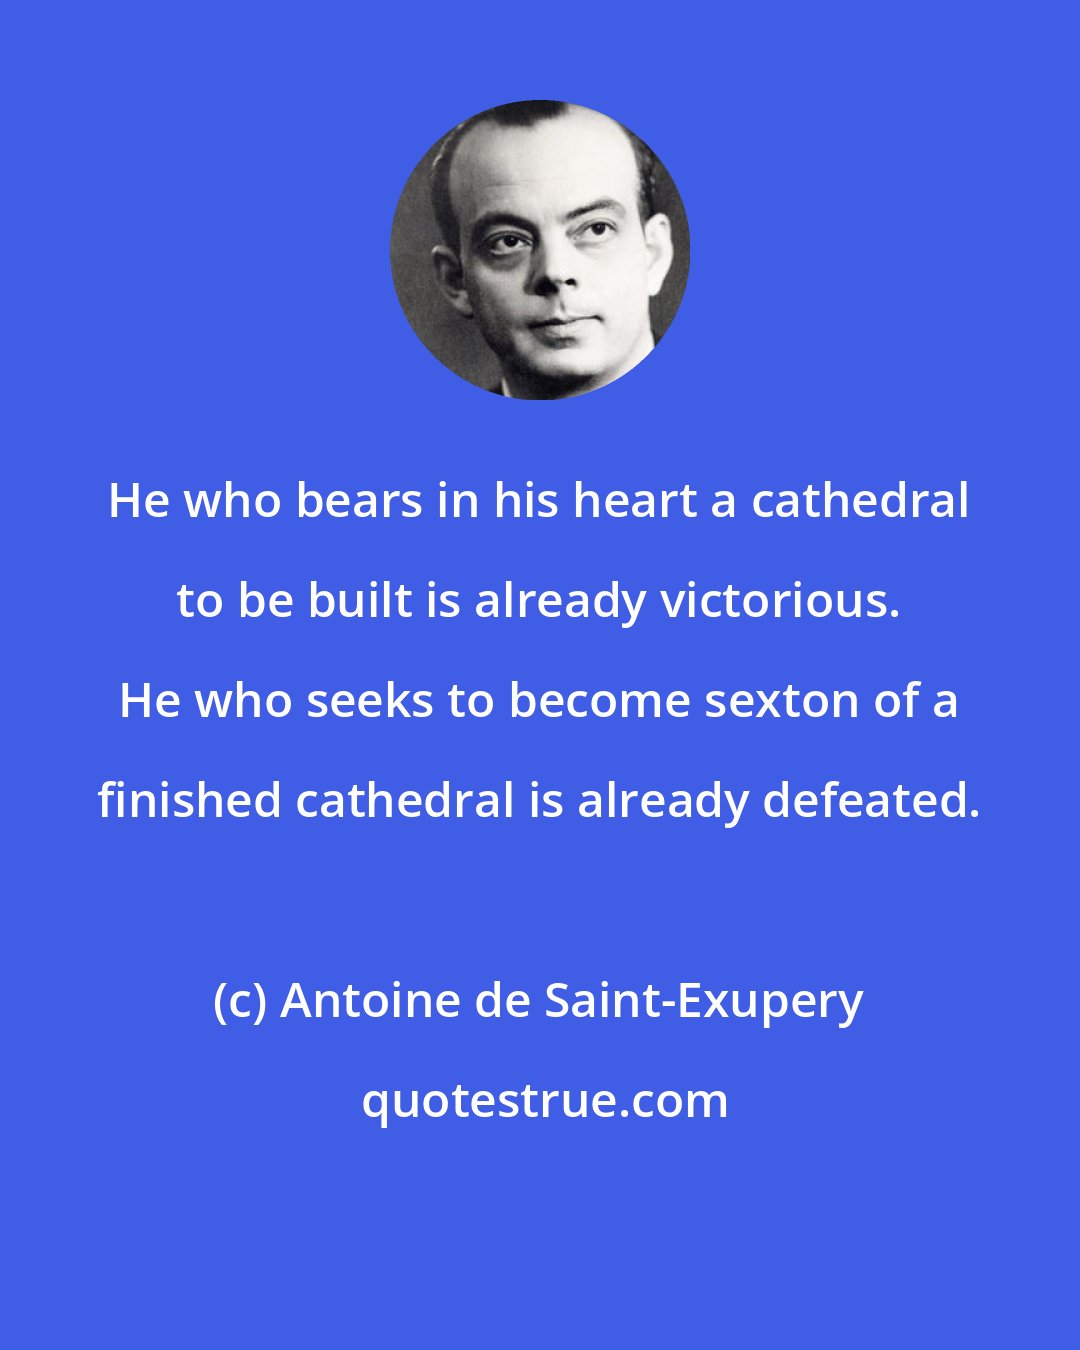 Antoine de Saint-Exupery: He who bears in his heart a cathedral to be built is already victorious. He who seeks to become sexton of a finished cathedral is already defeated.